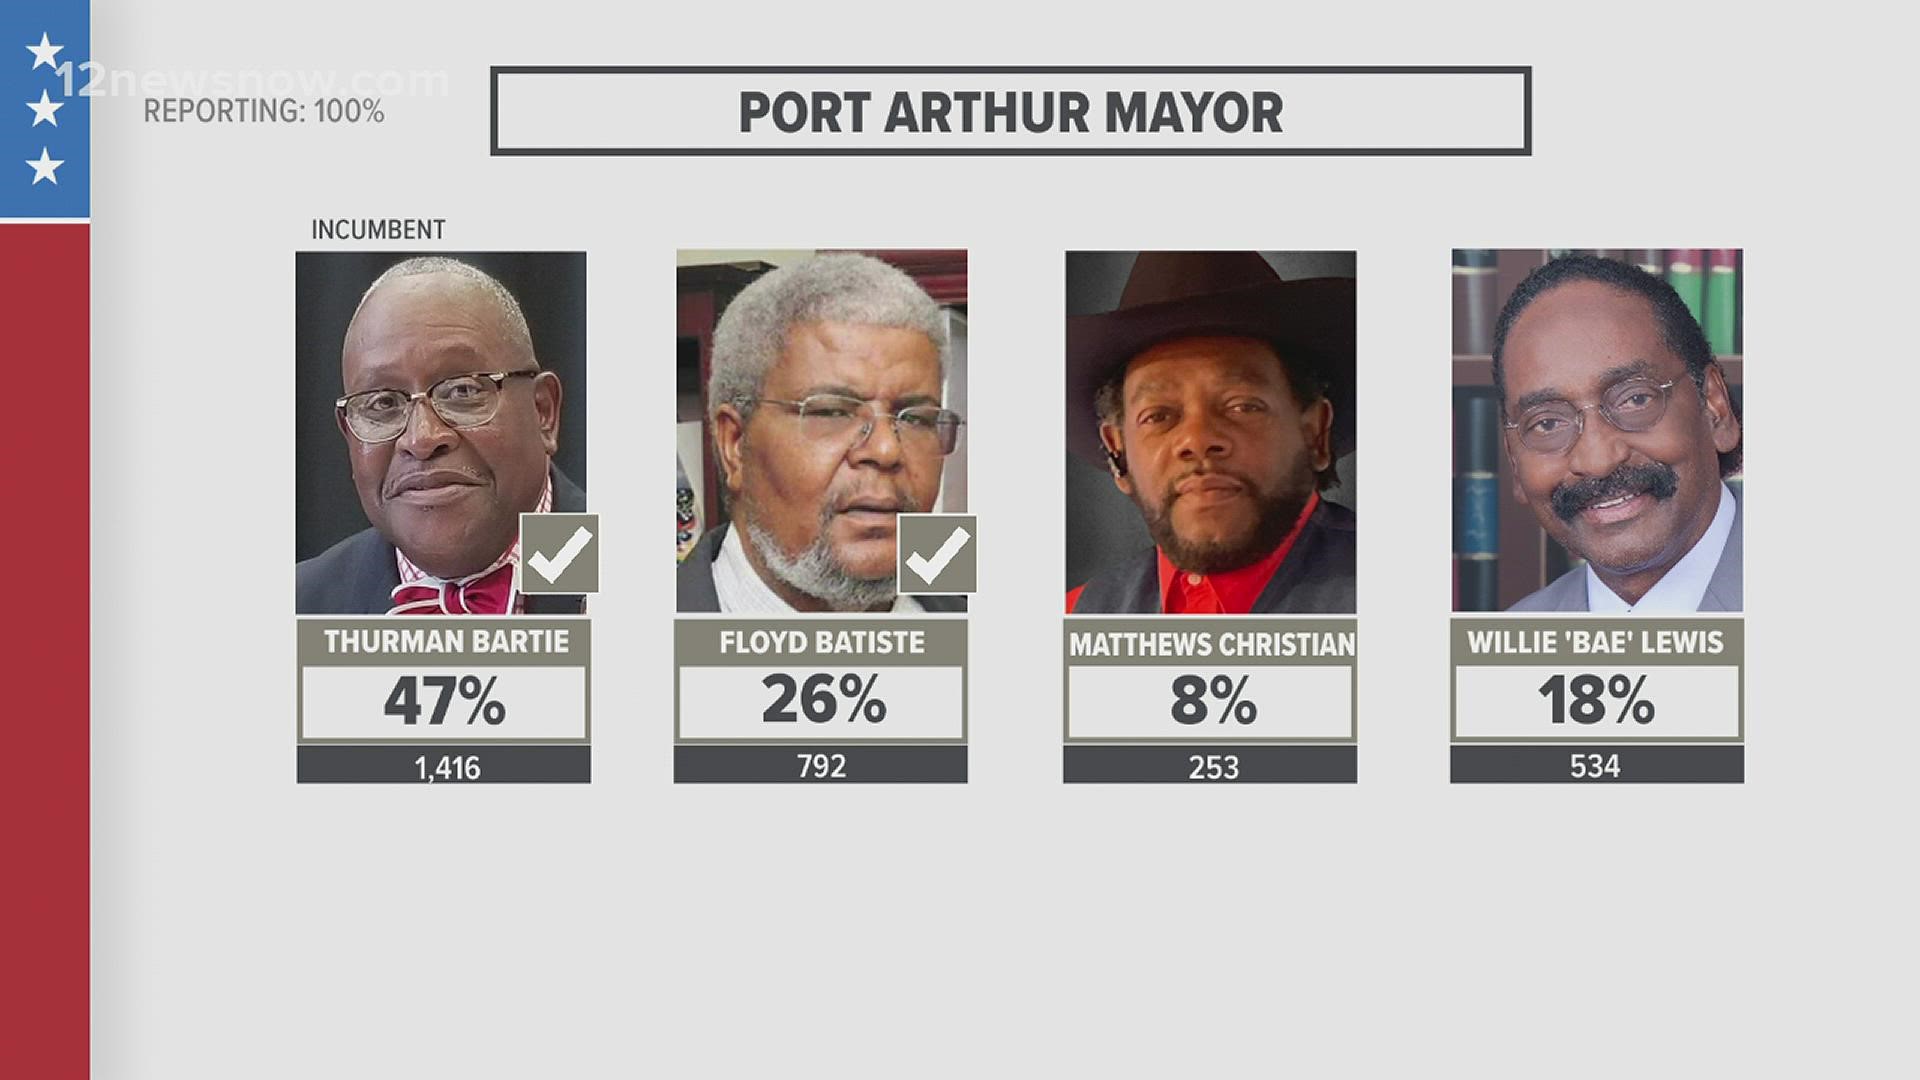 Thurman Bartie received 47% of the vote and Floyd Batiste received 26% of the vote.